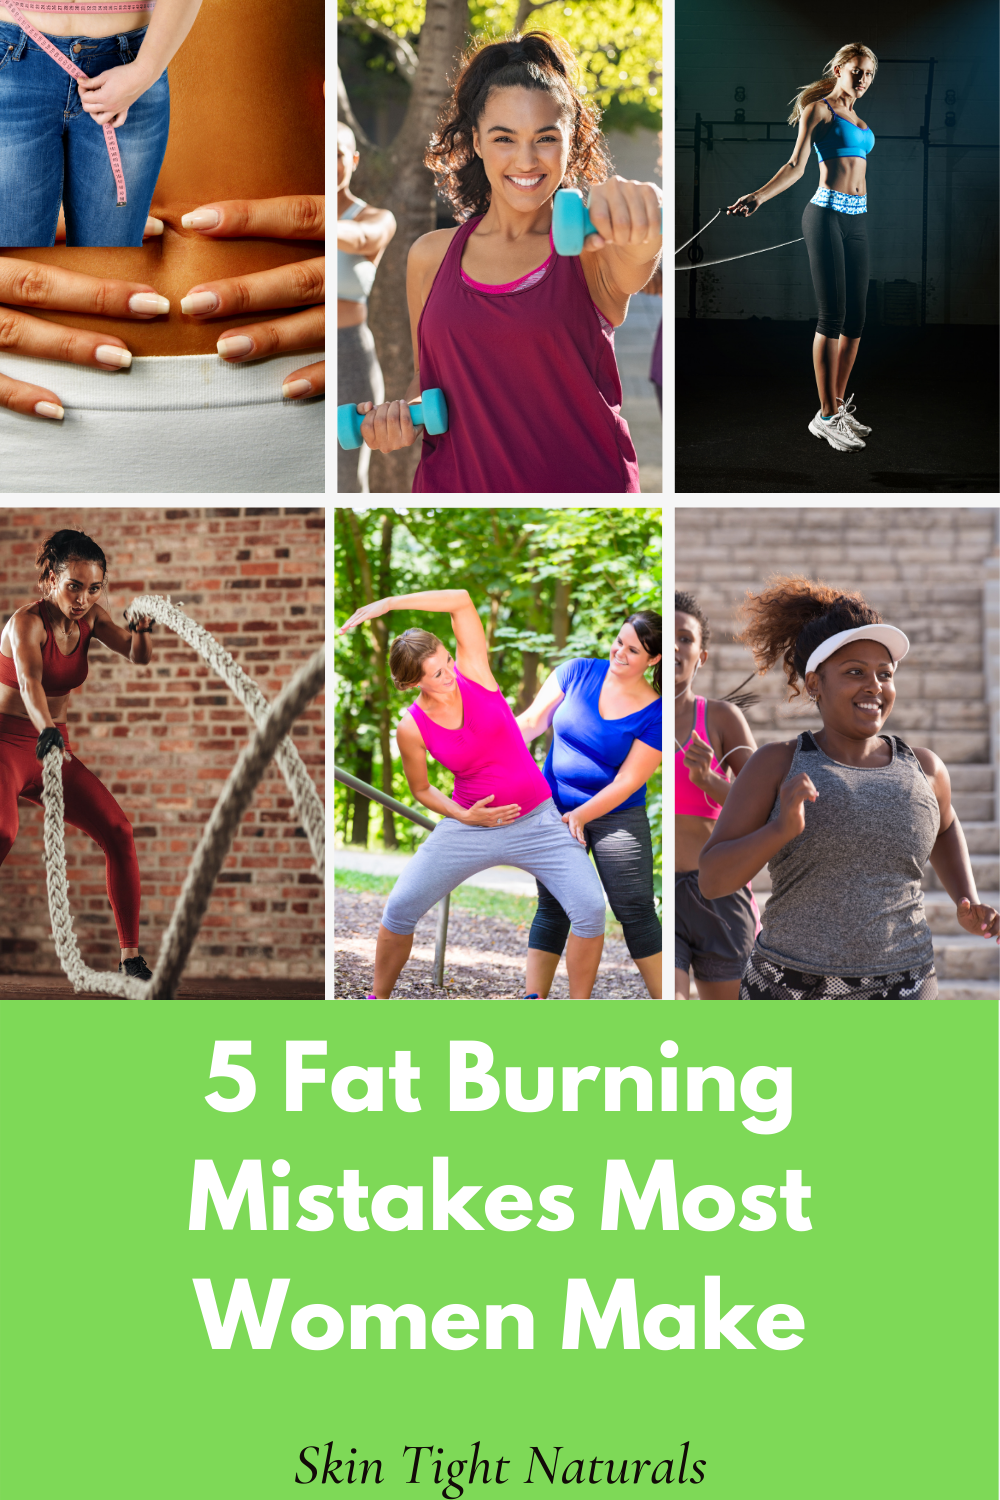 5 Fat Burning Mistakes Most Women Make